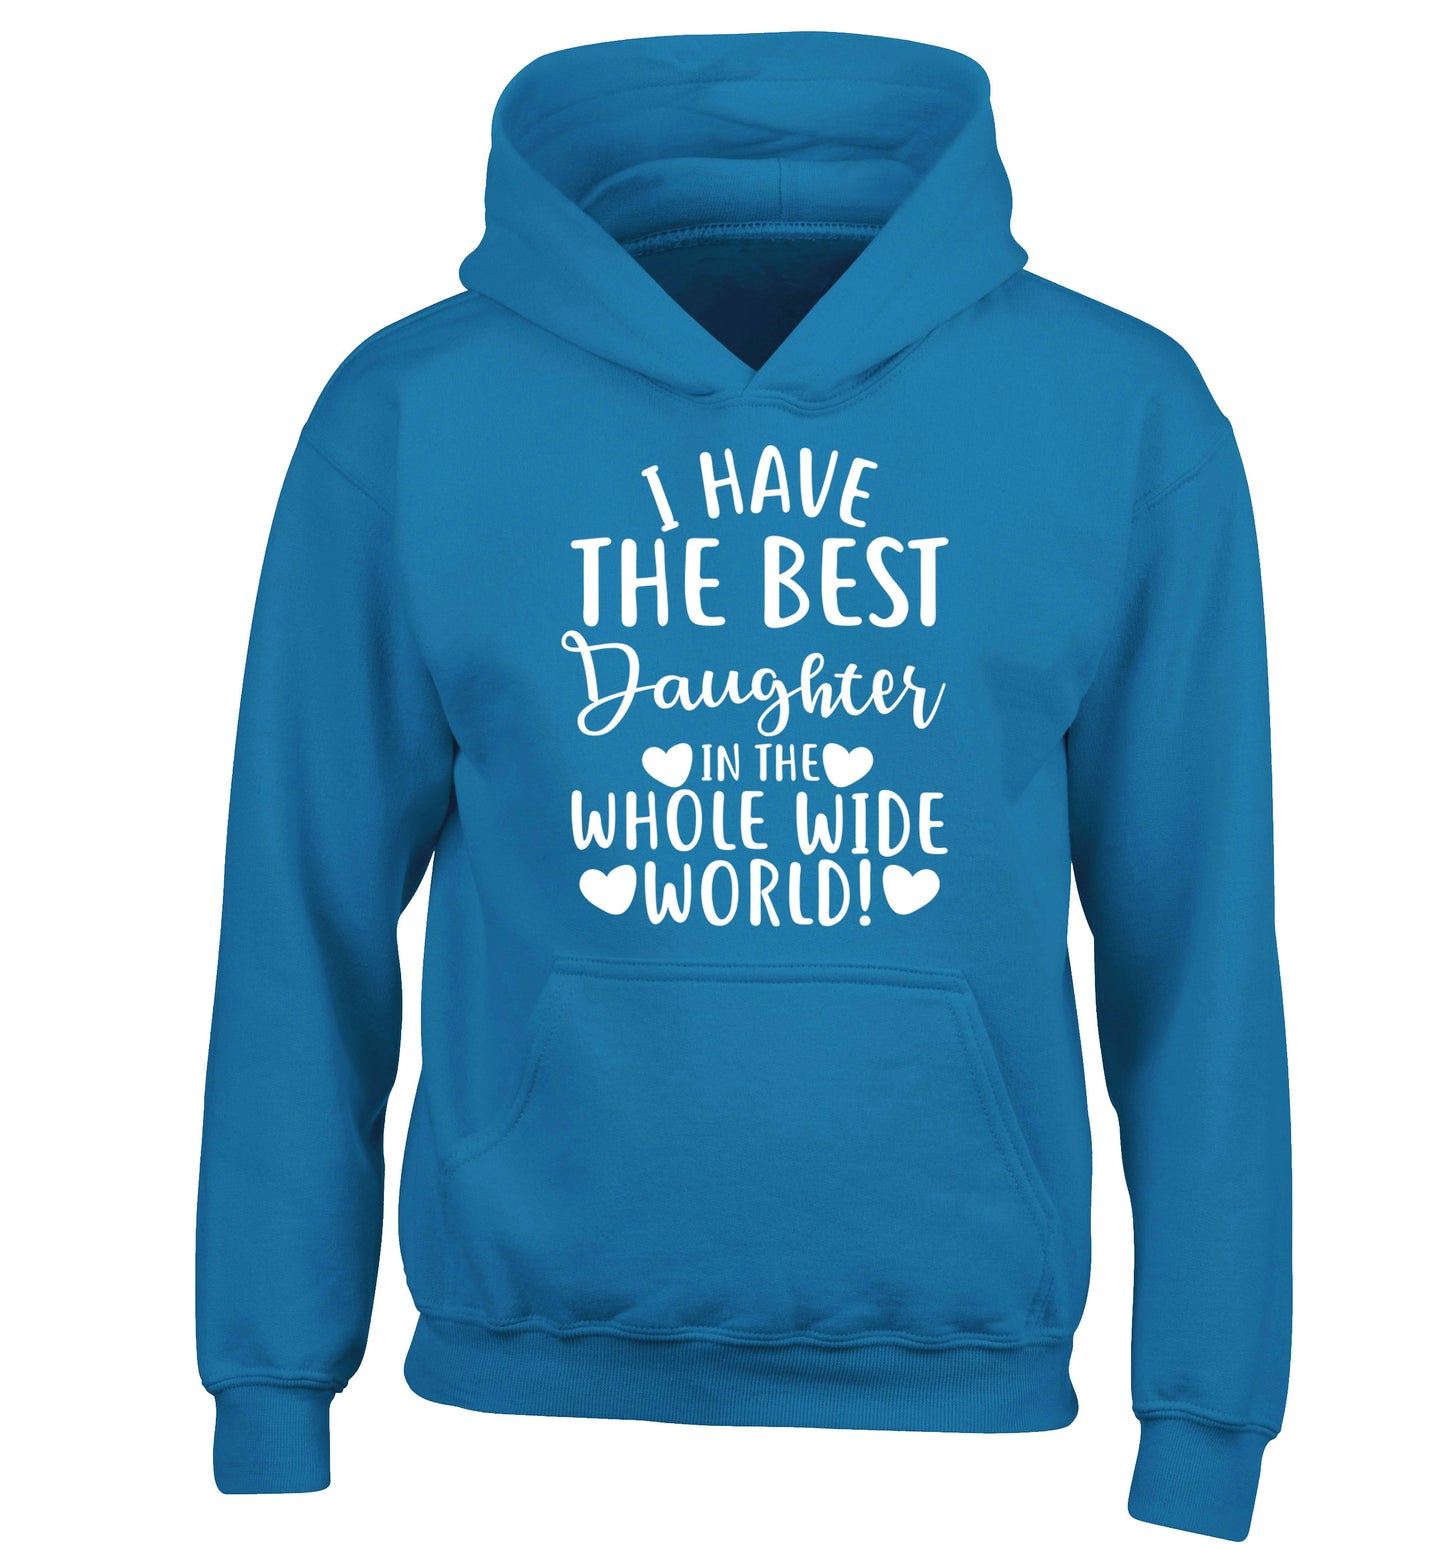 I have the best daughter in the whole wide world! children's blue hoodie 12-13 Years